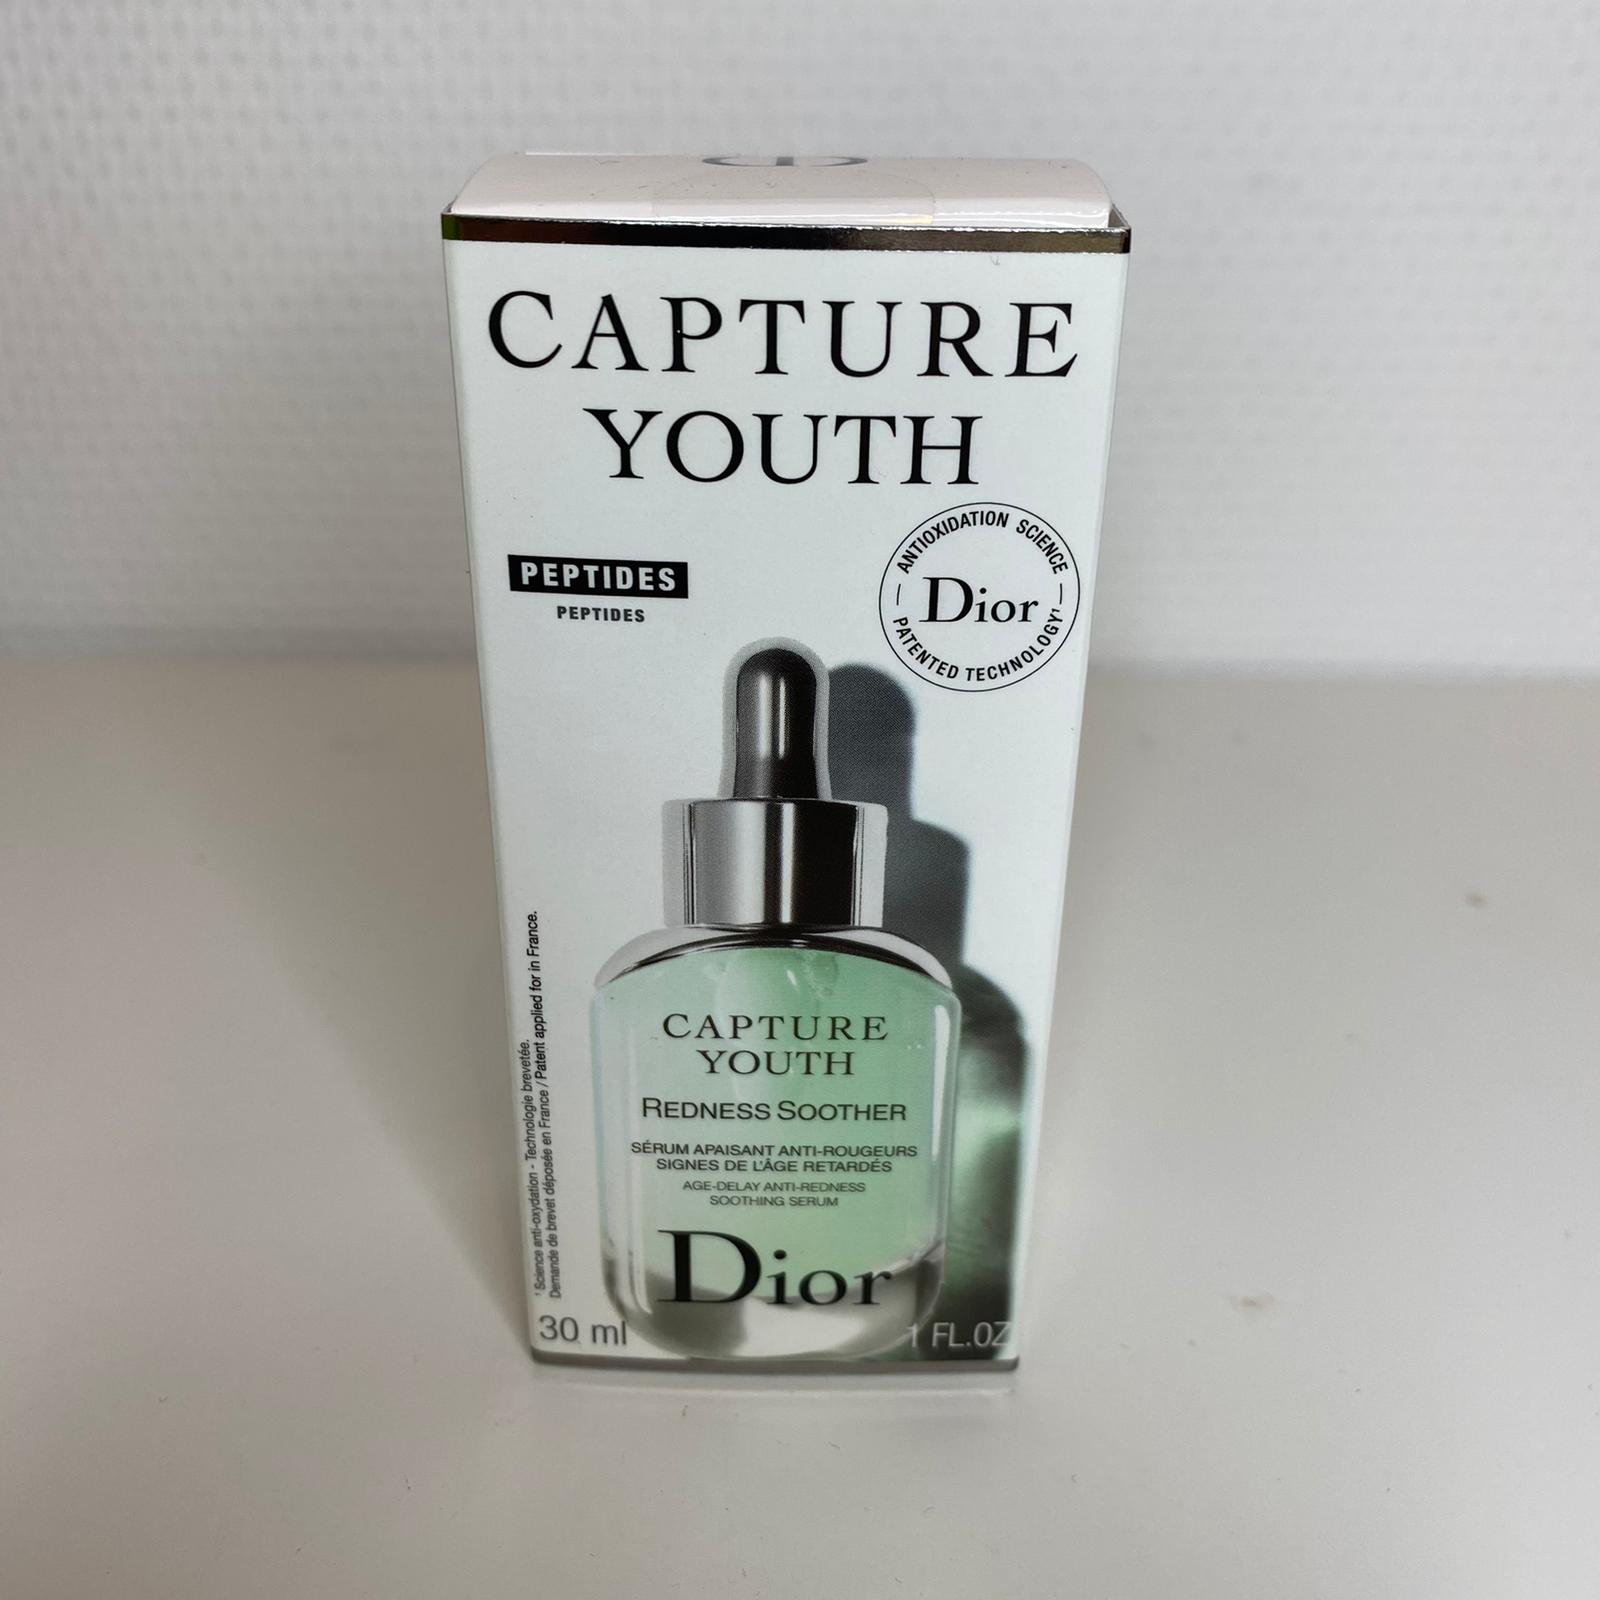 Dior capture youth redness soother 30 ml